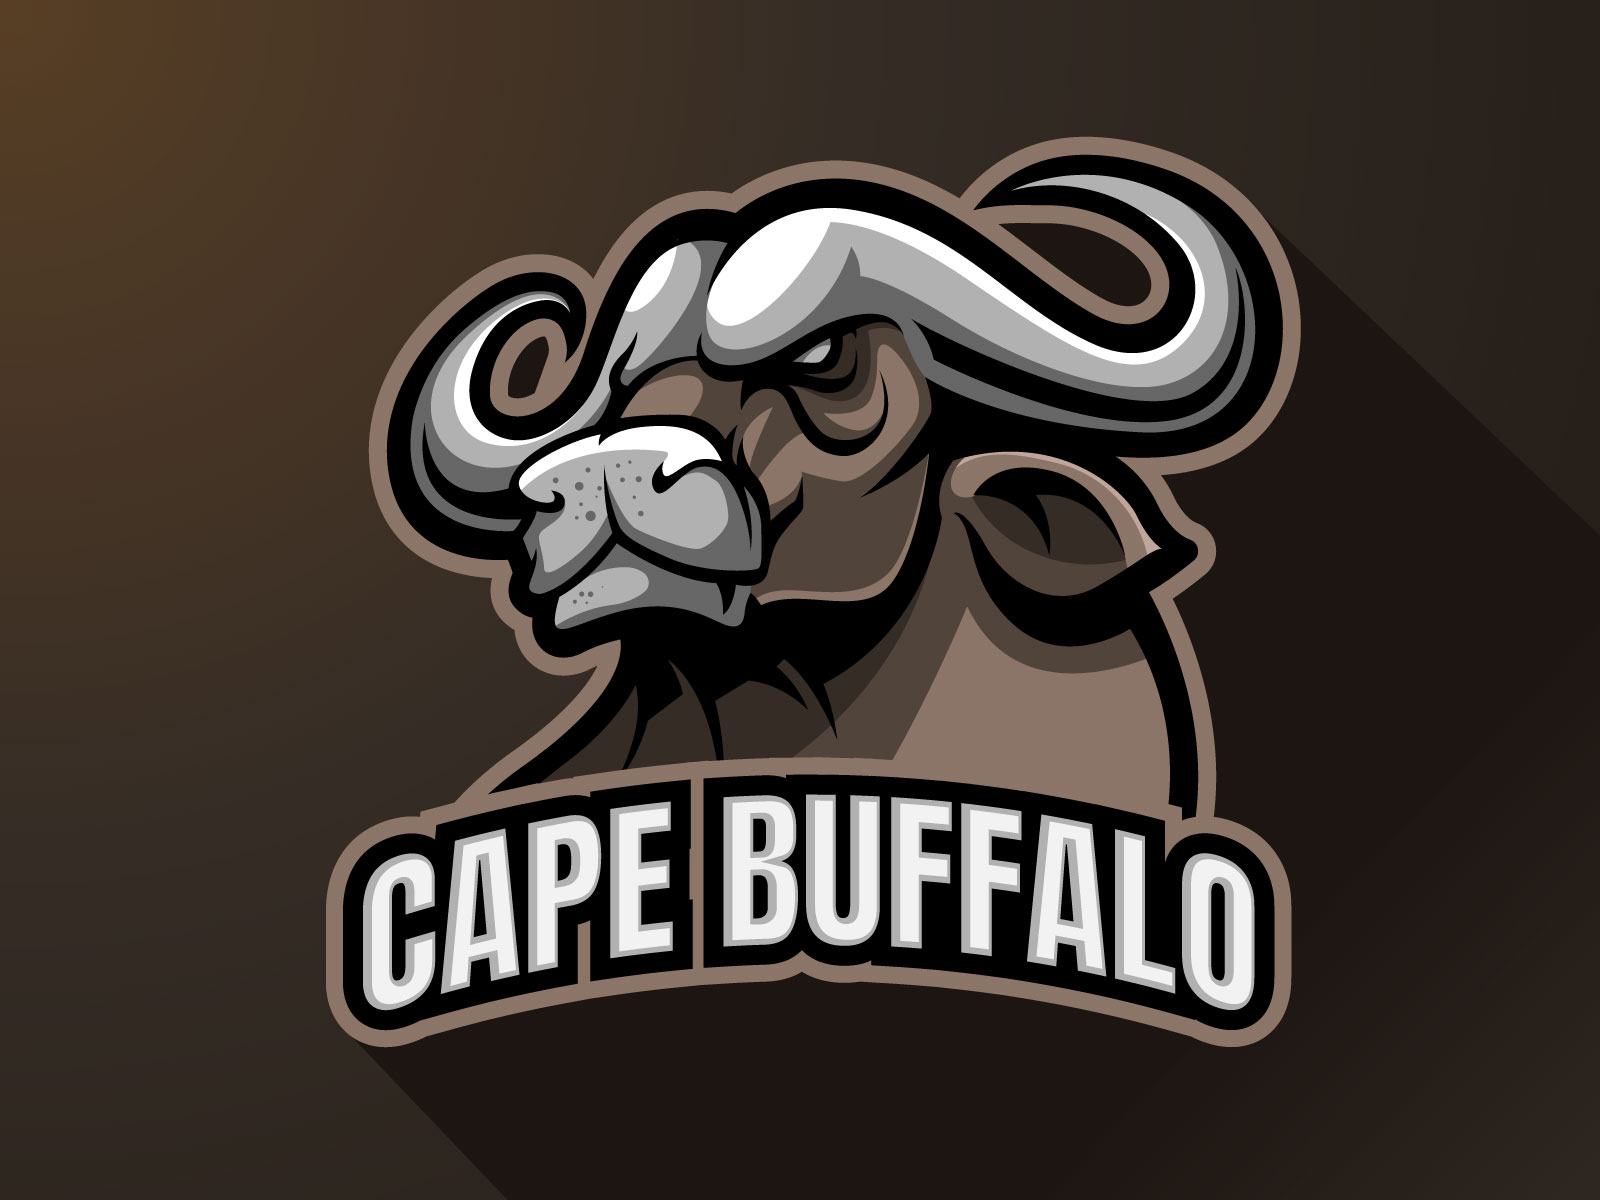 Cape buffalo Mascot logo by DewApples for Tistio on Dribbble